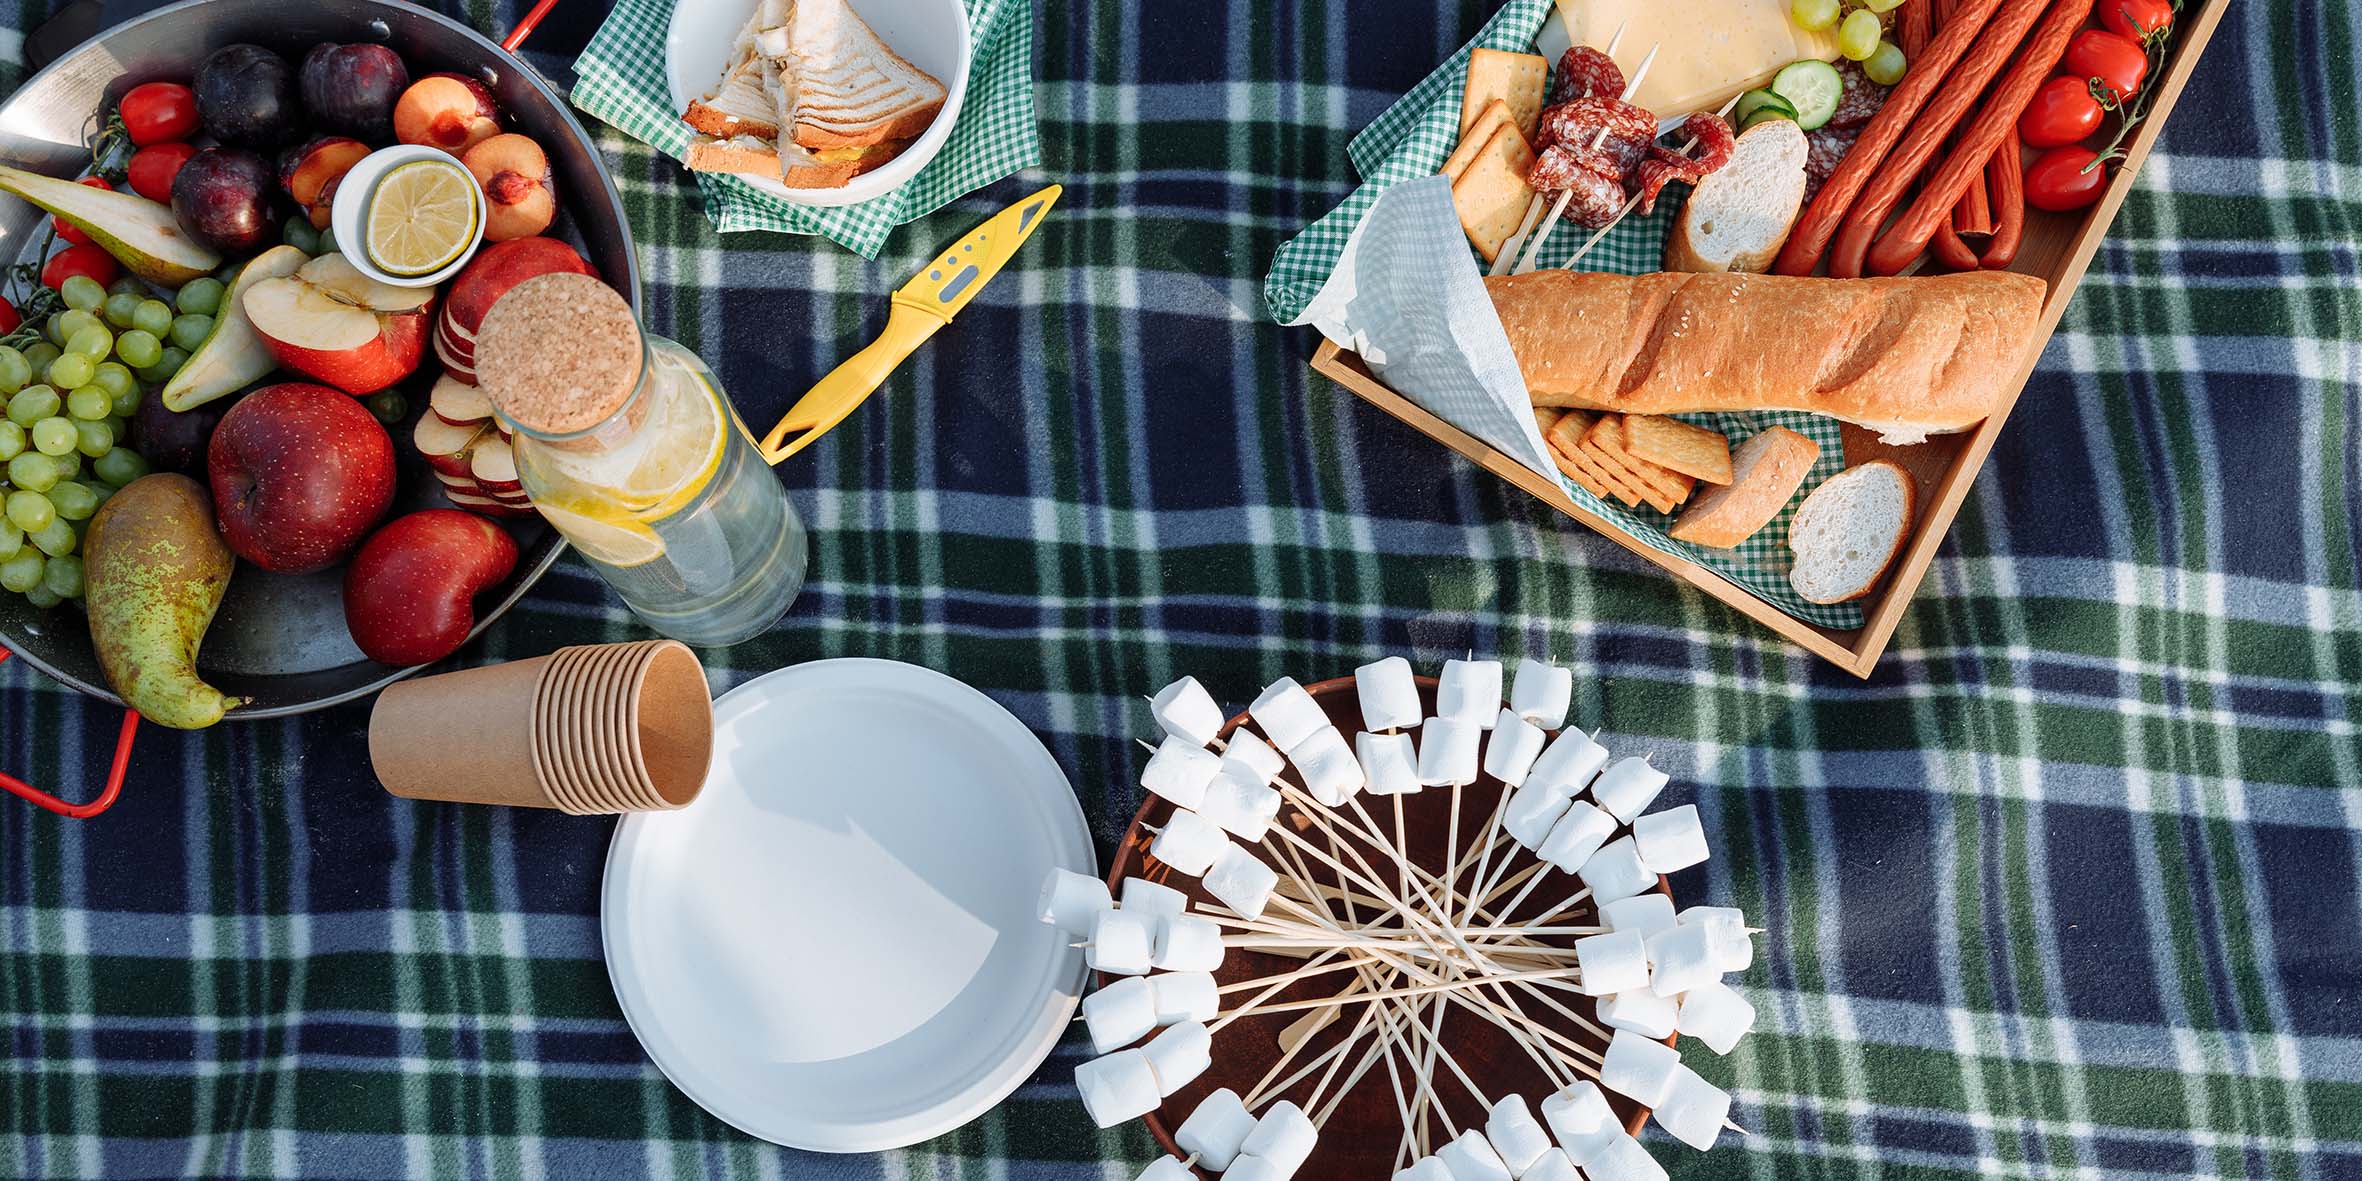 A checkered blanket with a plate of marshmallows, a basket of bread and fruit and some plates.